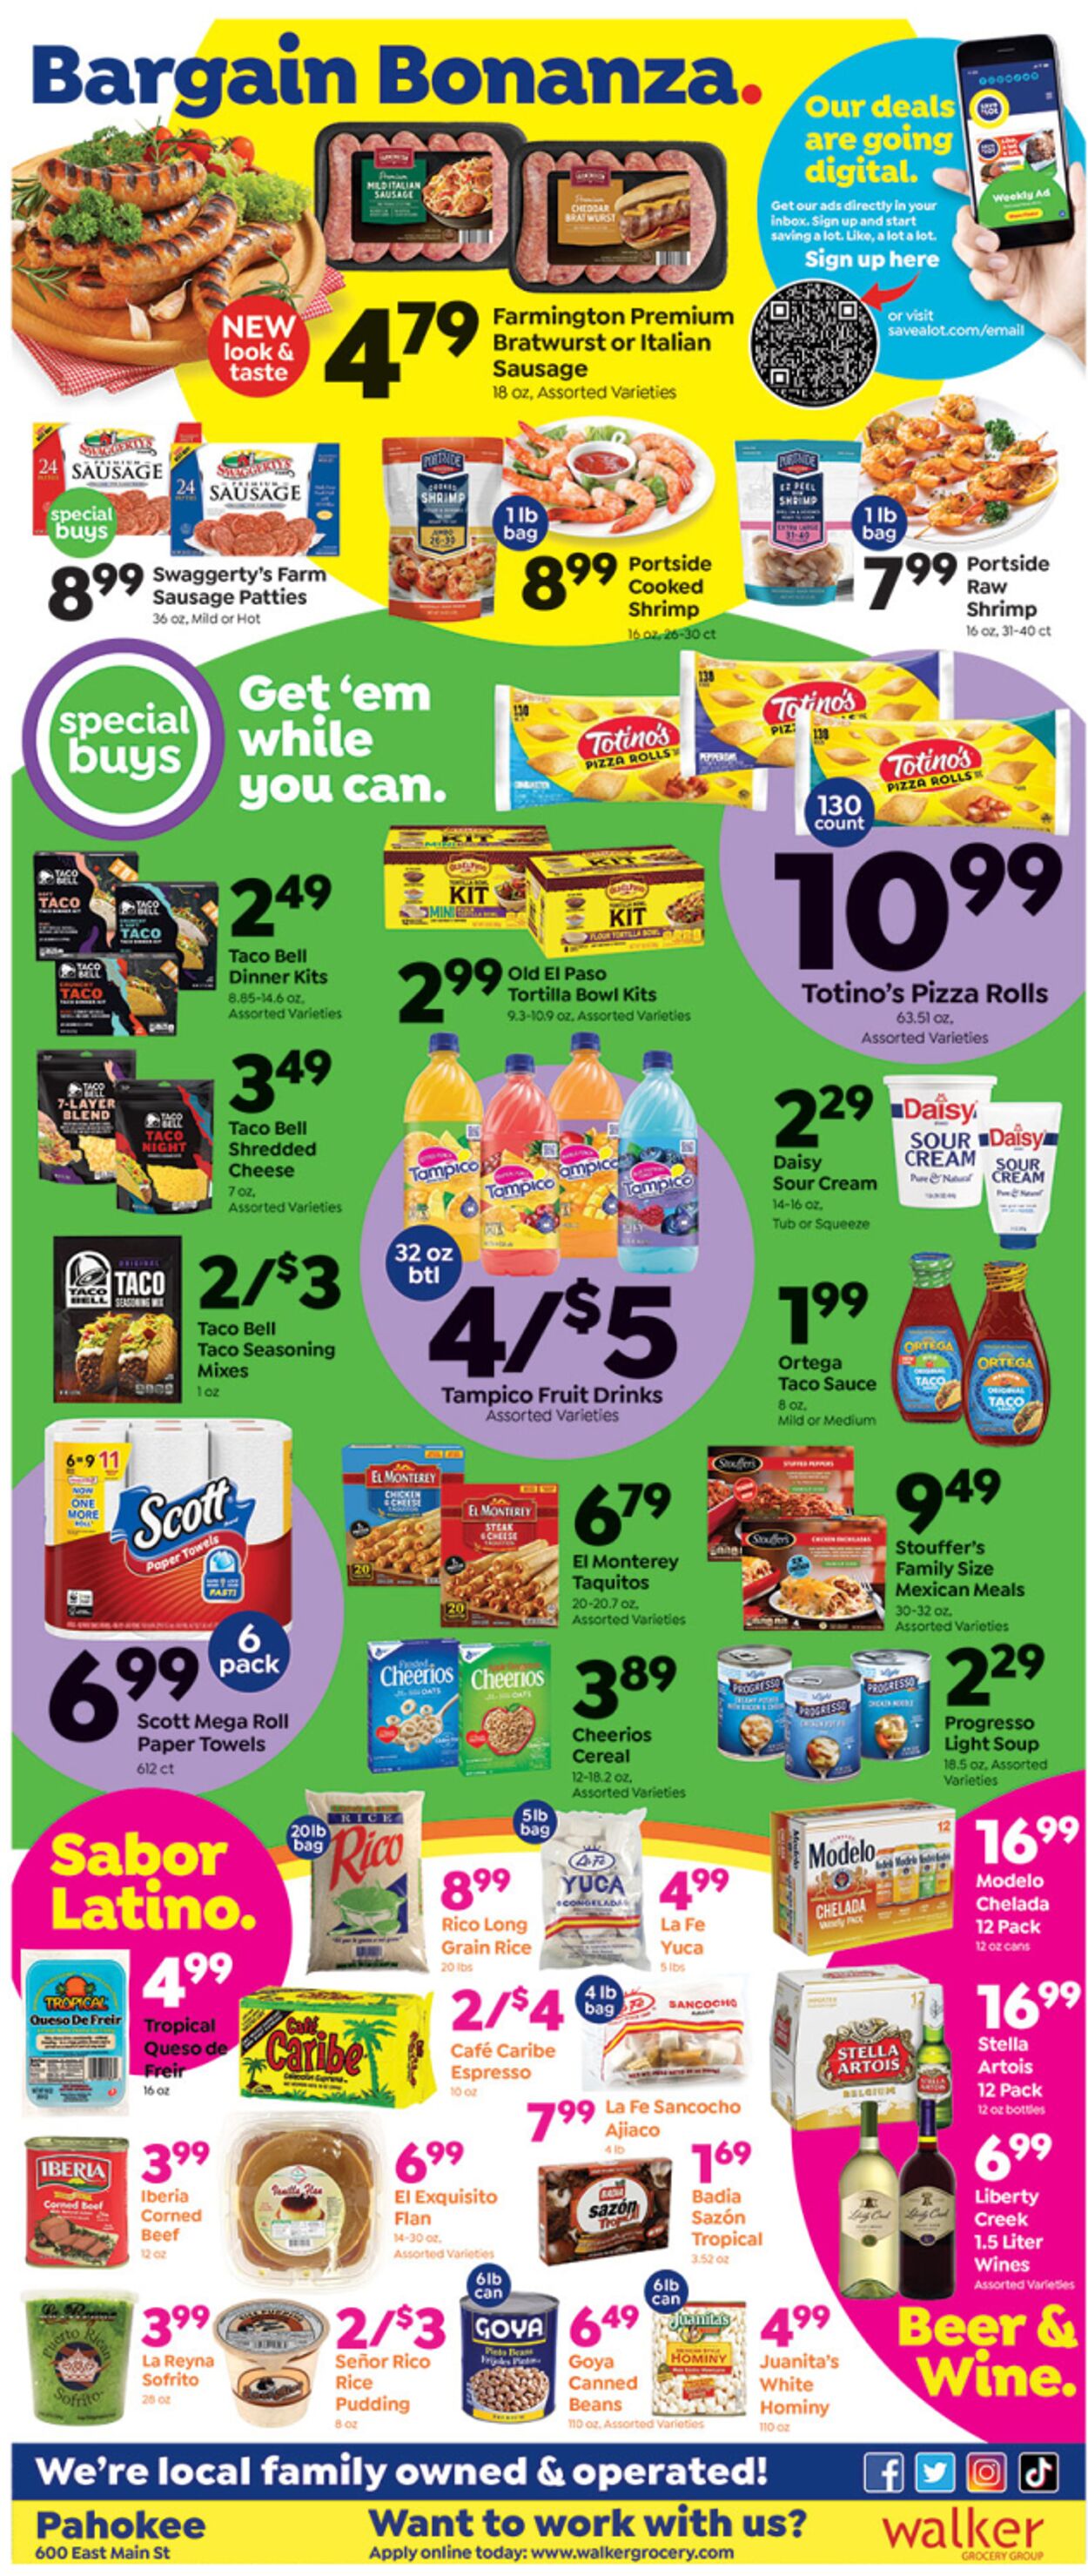 Weekly ad Save a Lot 10/05/2022 - 10/11/2022